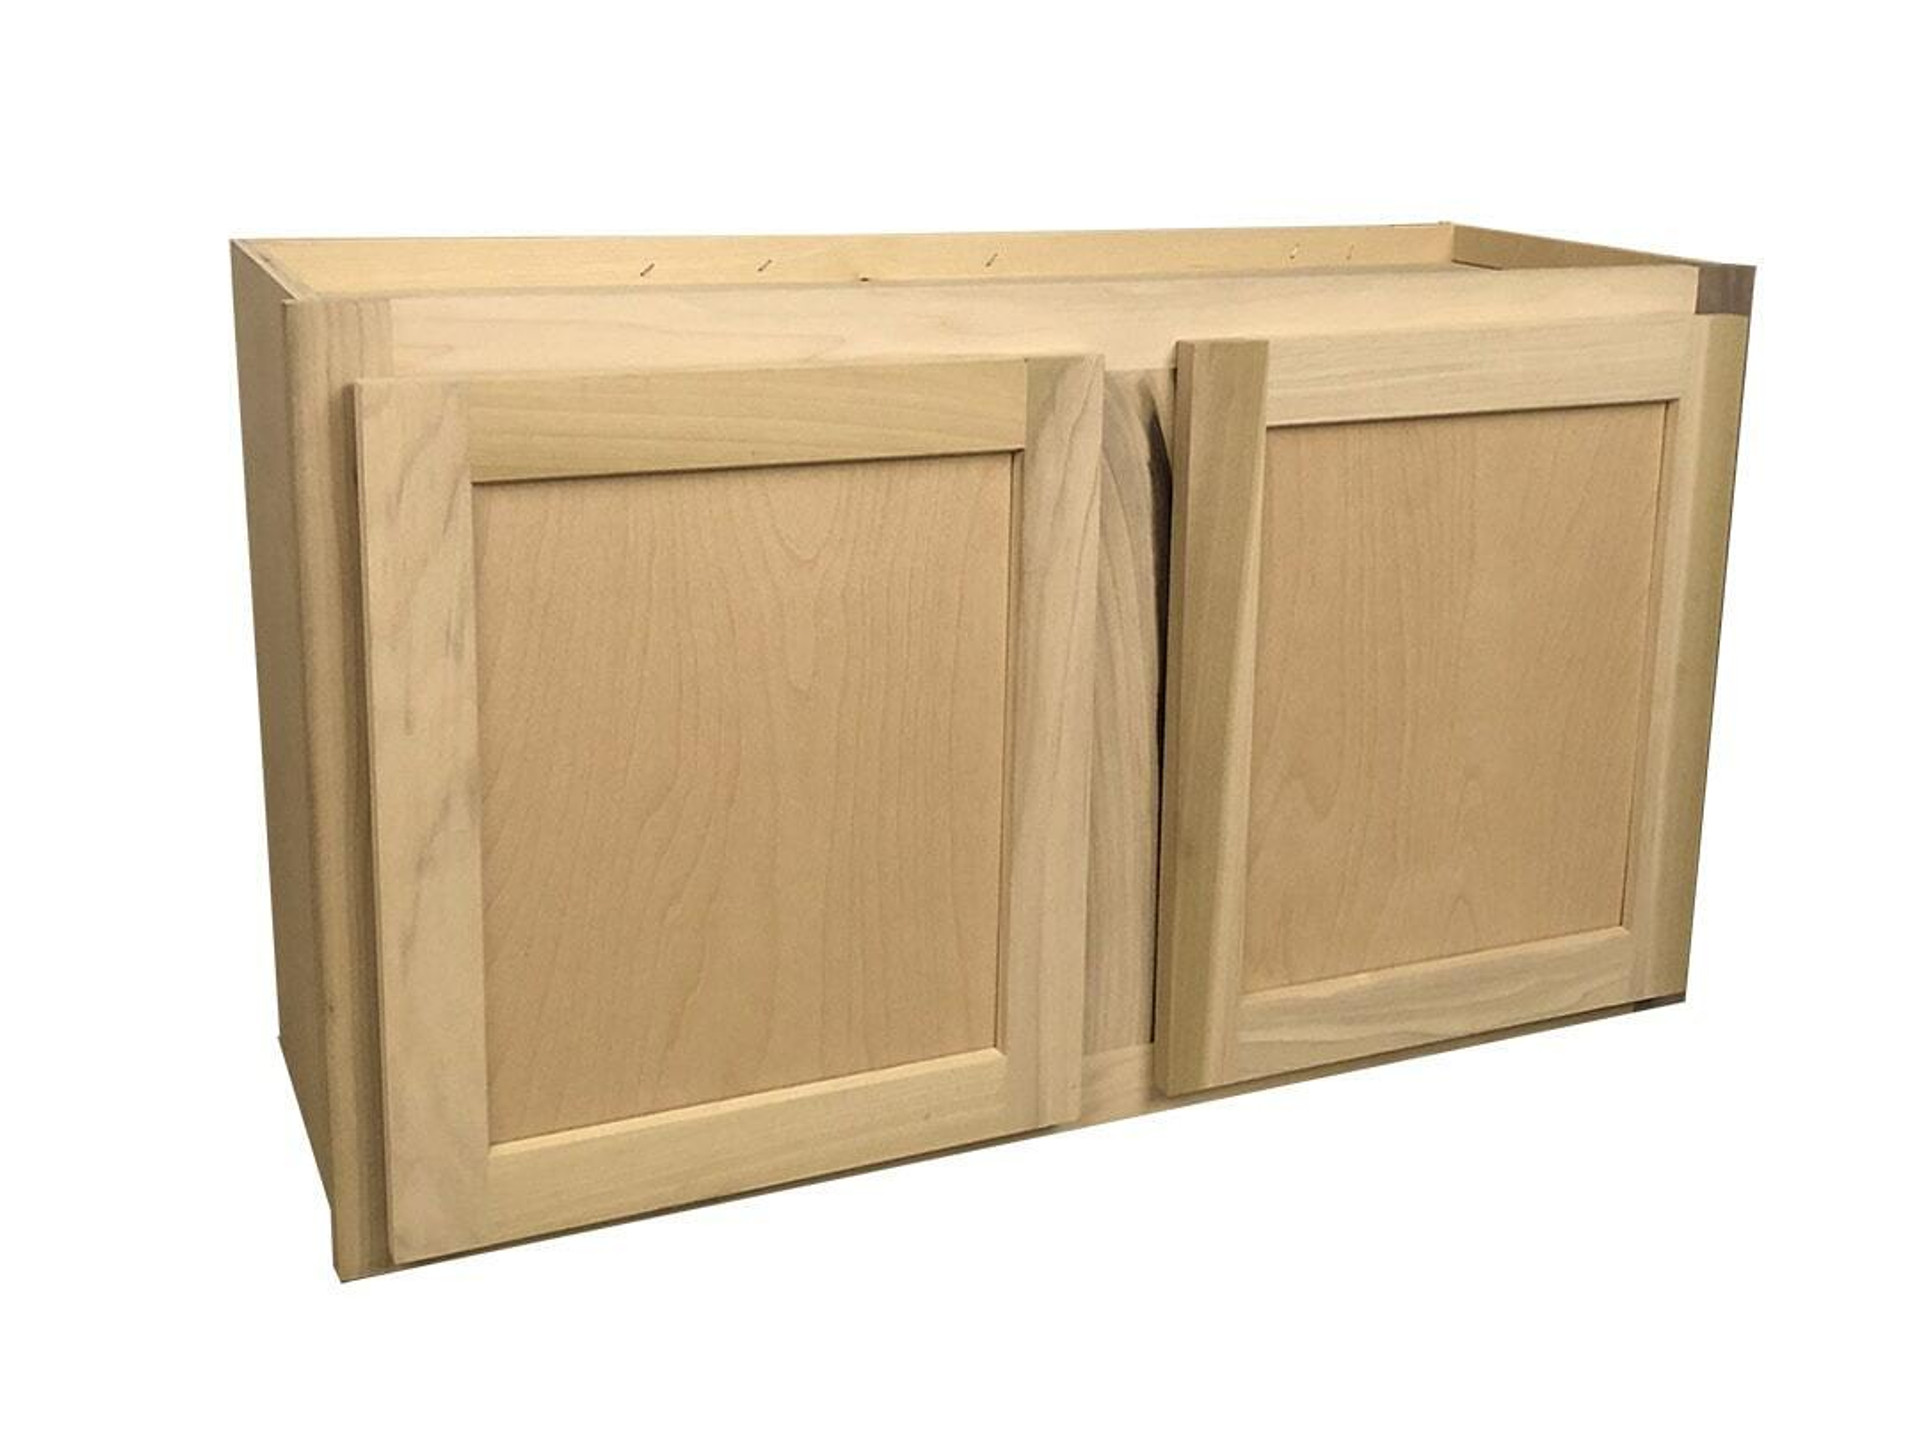 Kitchen Wall Cabinet Or Unfinished Poplar Or Shaker Style Or 36x18x12 In  29614.1626205469 ?c=2